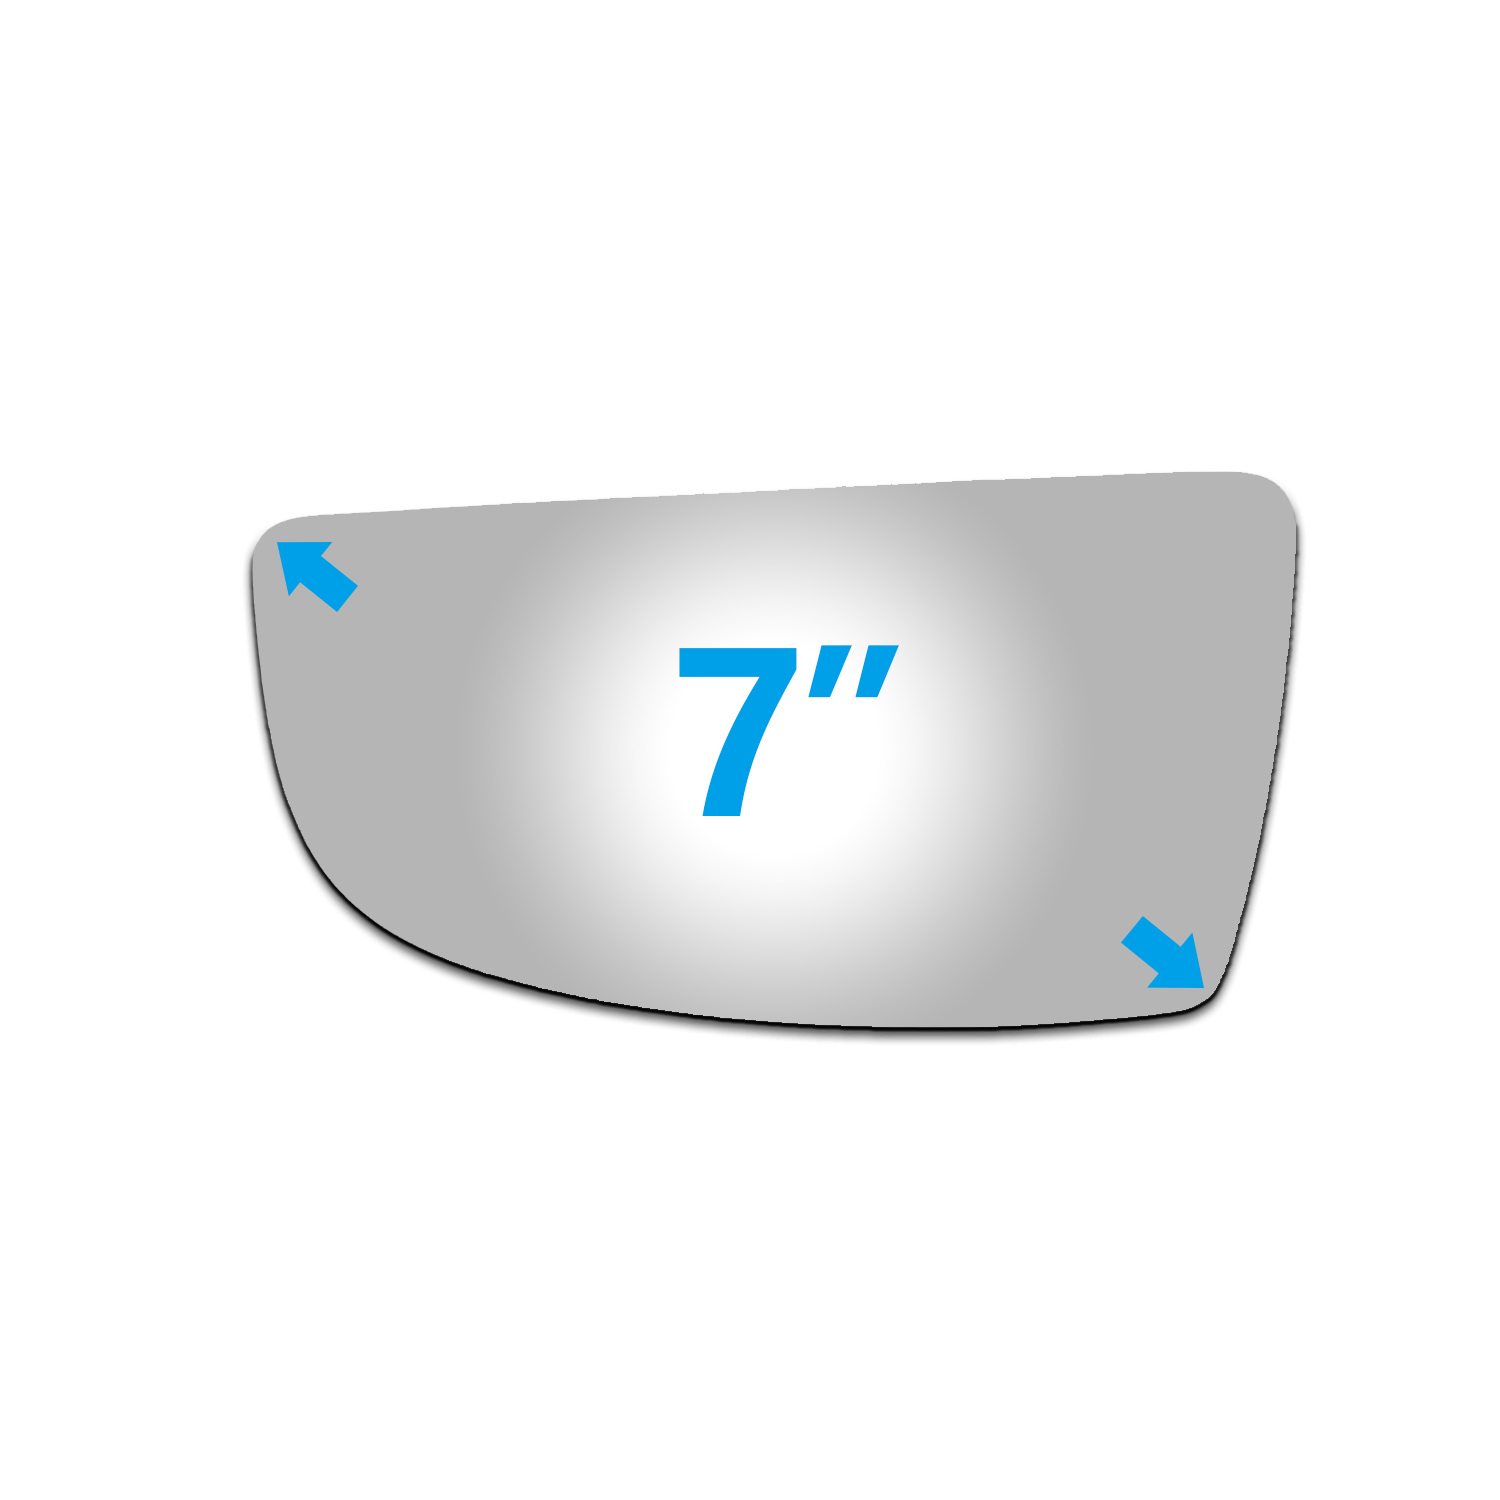 WLLW Replacement Lower Mirror Glass for 2015-2021 Ford Transit 150/250/350/350 HD, 2022-2023 E-TRANSIT, Driver Left Side LH/Passenger Right Side RH/The Both Sides Convex M-0071